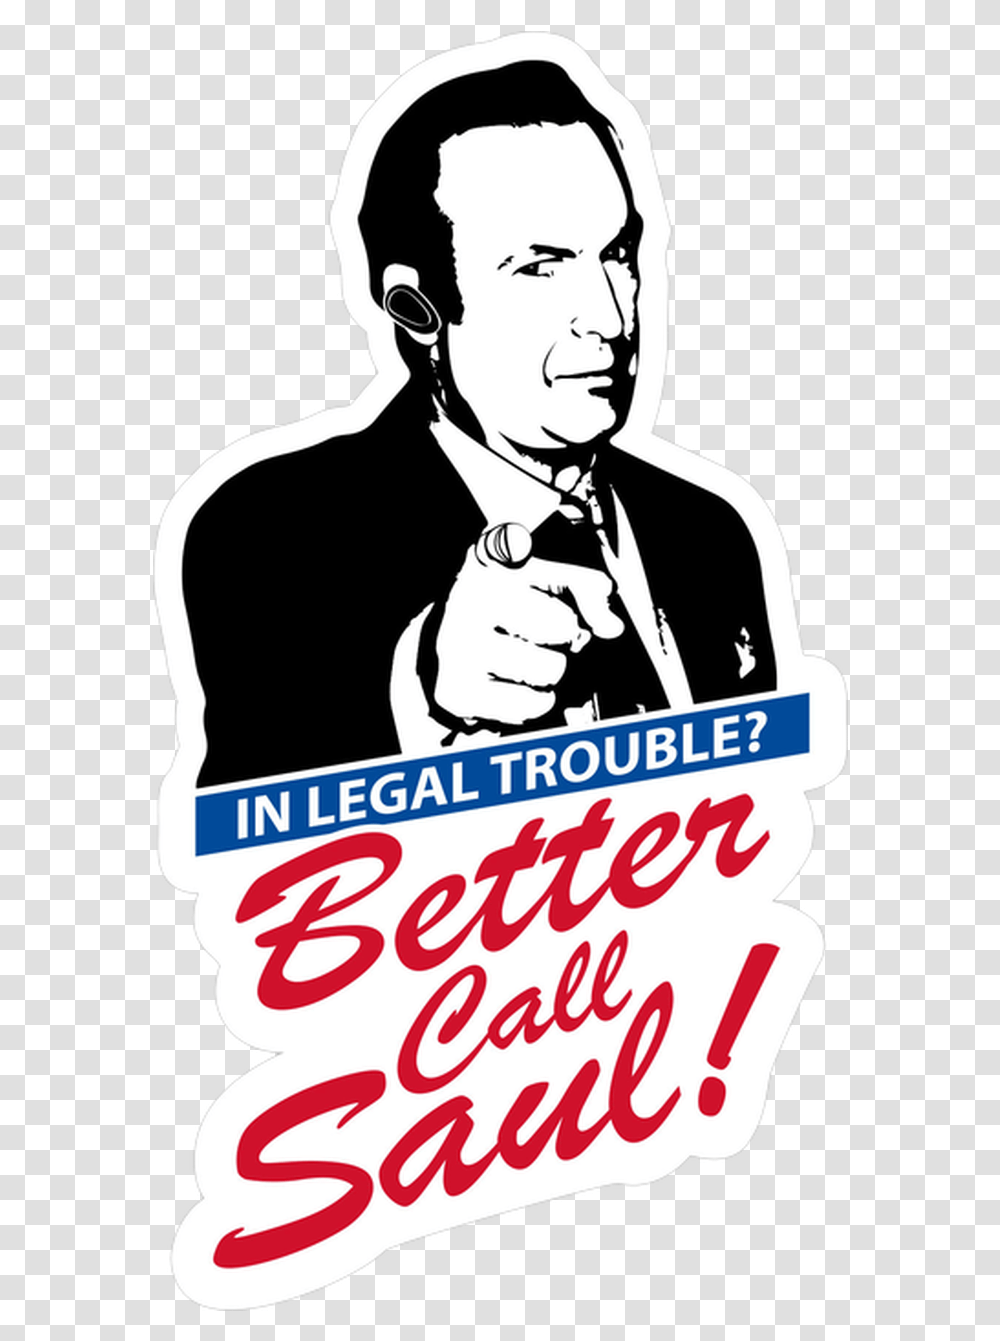 Breaking Bad Better Call Saul 57 X 105cm Rugheopty010007 Legal Trouble Better Call Saul, Advertisement, Poster, Flyer, Paper Transparent Png